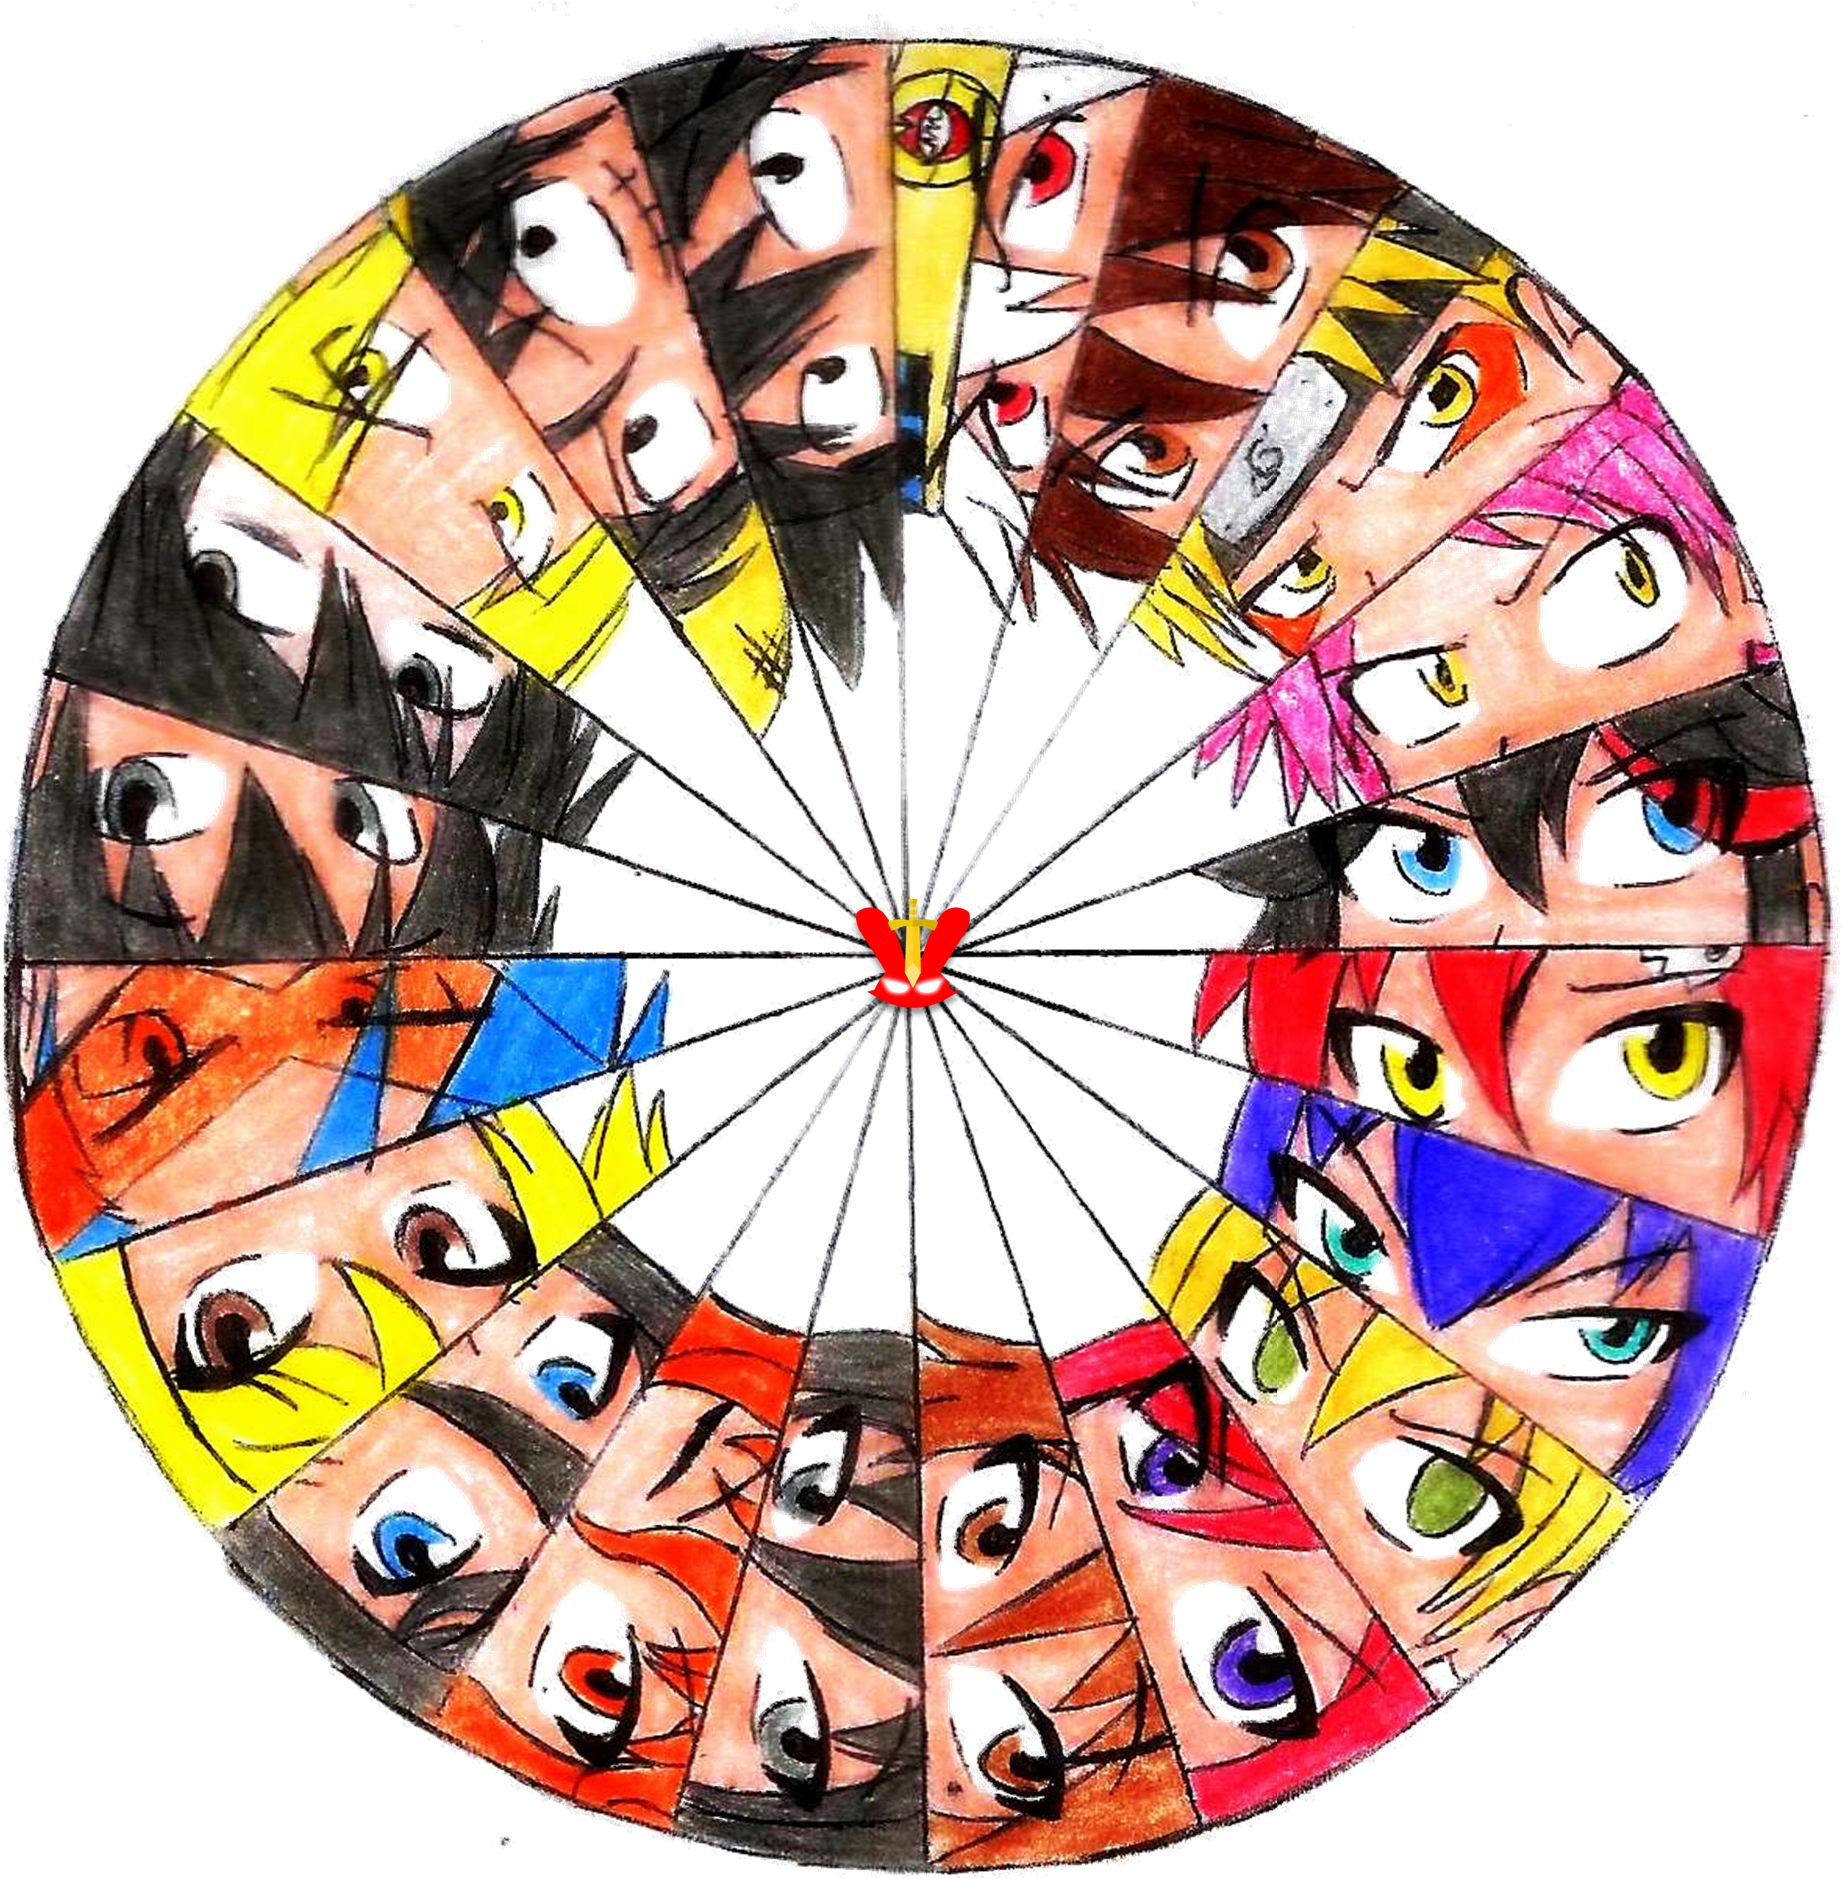 Betonline Promotional Codes For Sportsbook And Casino - Anime Dart Board (1875x1888)